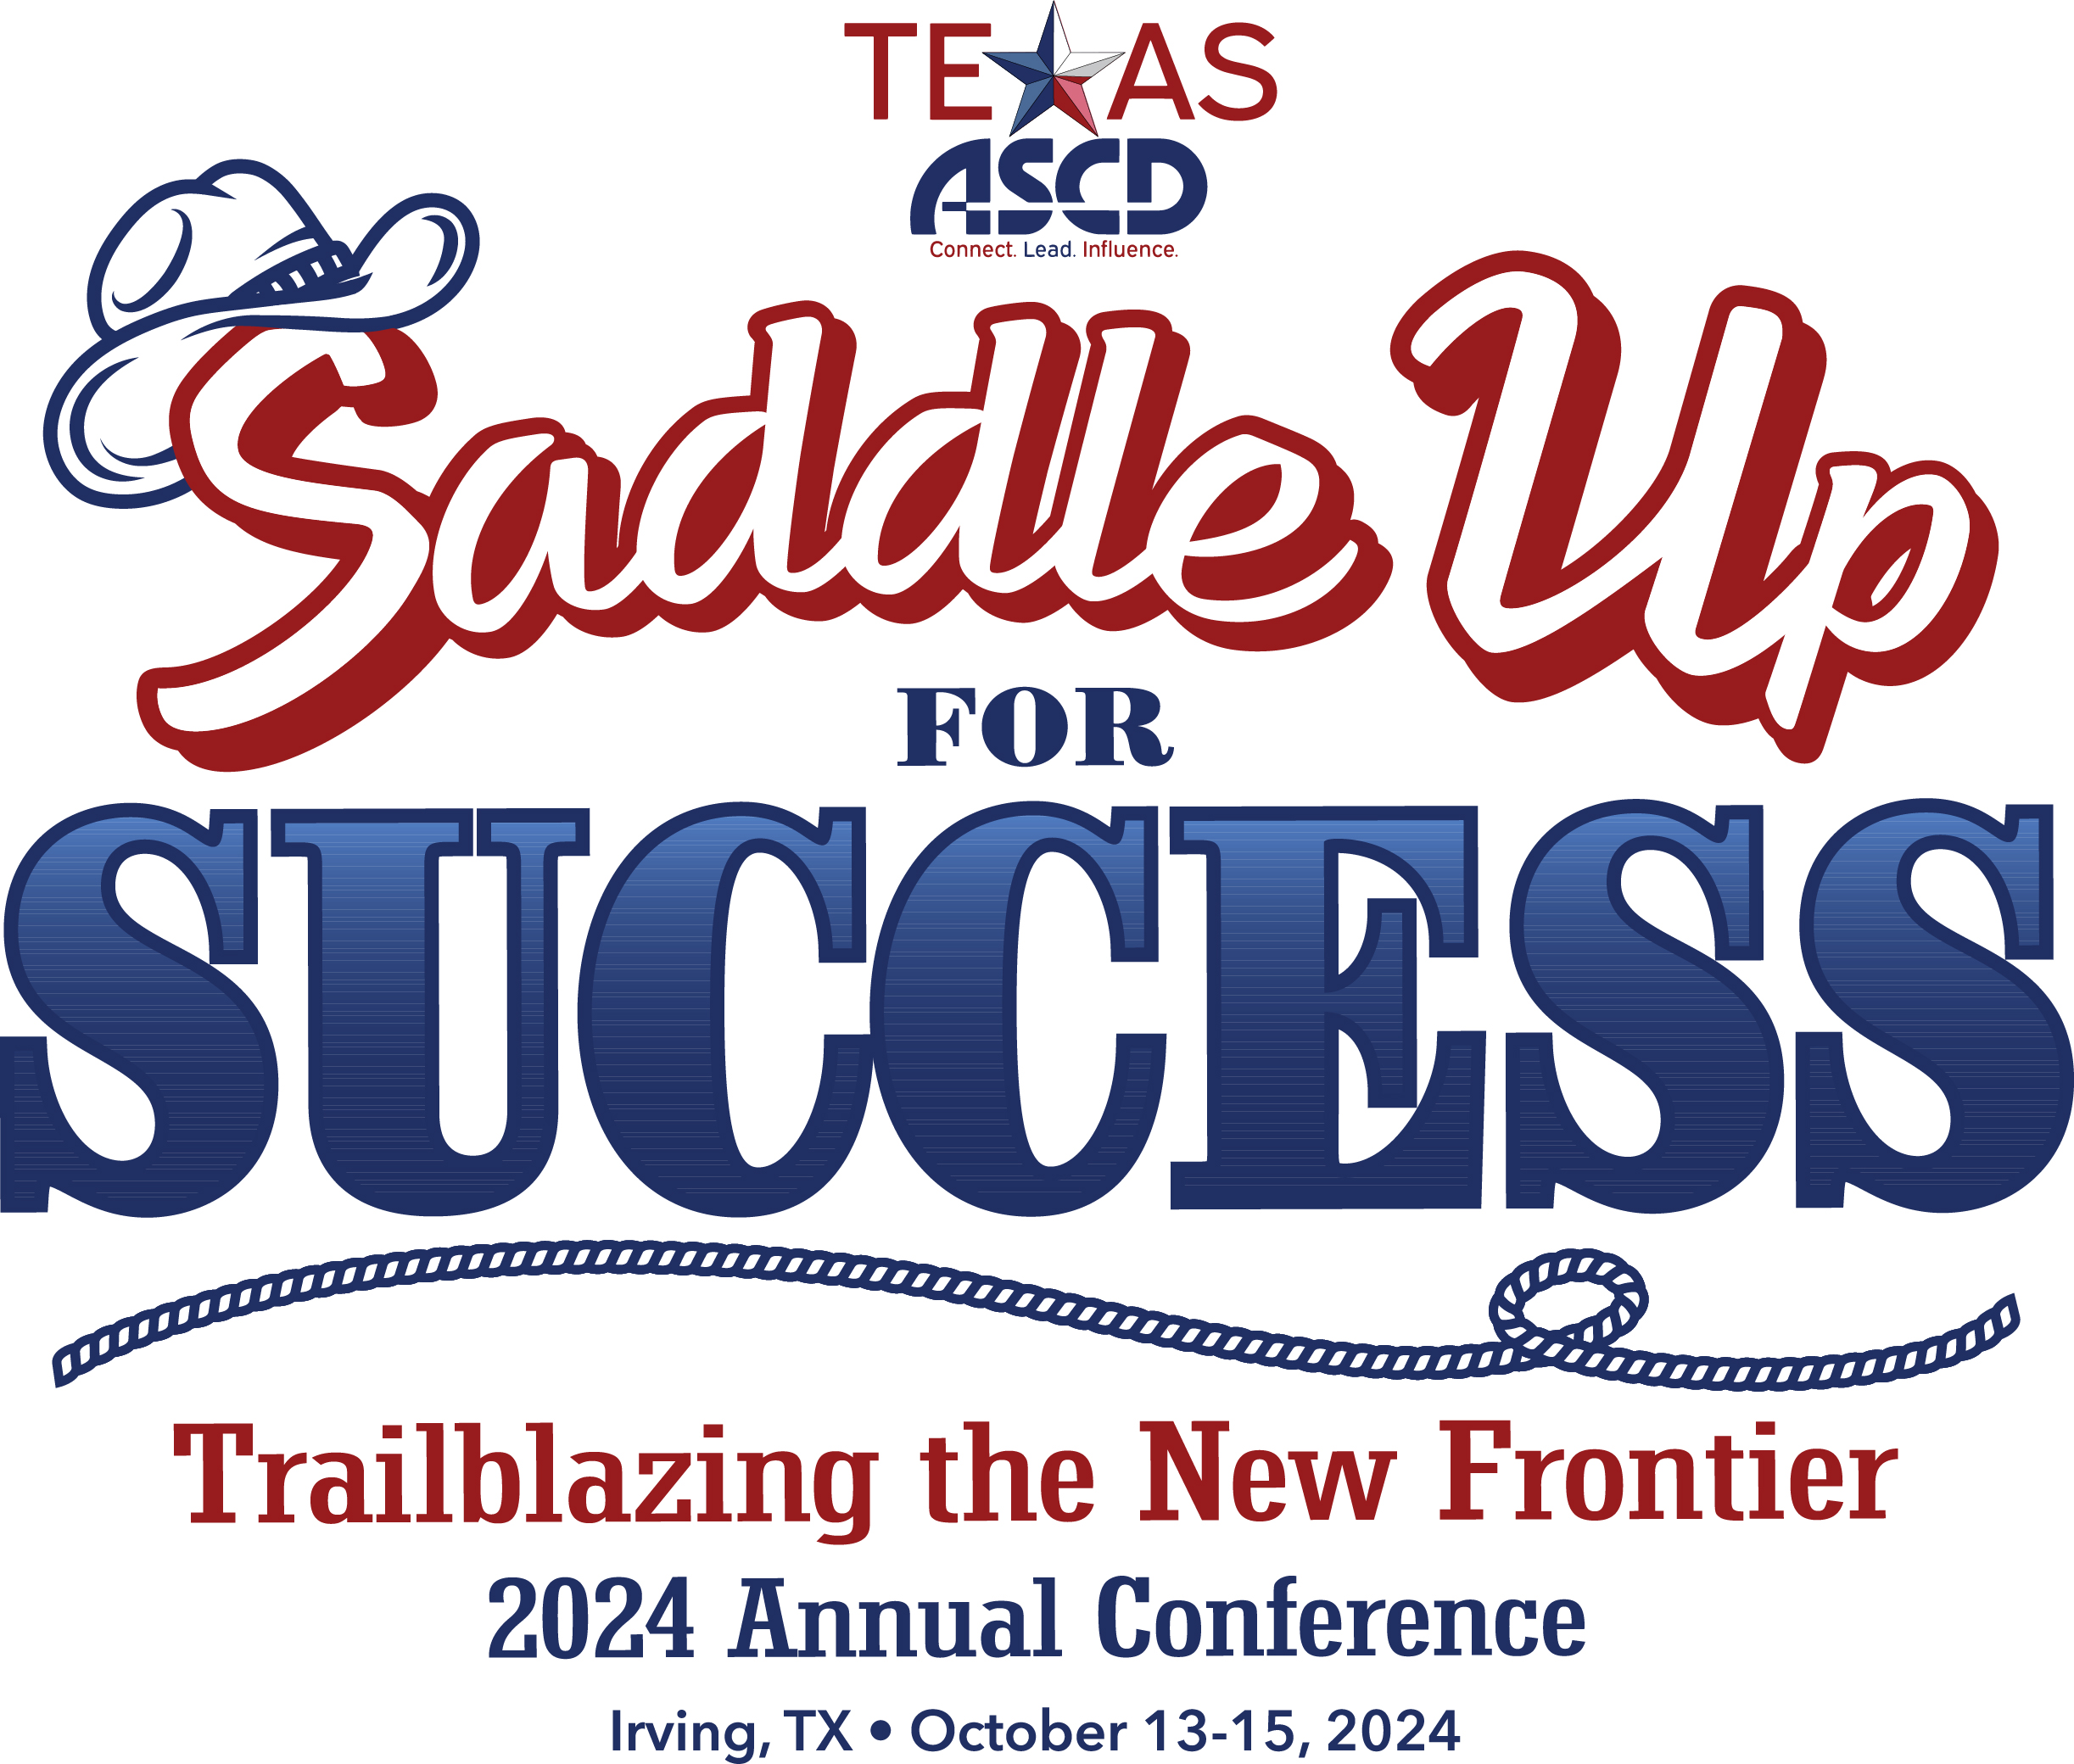 2024 Texas ASCD Annual Conference